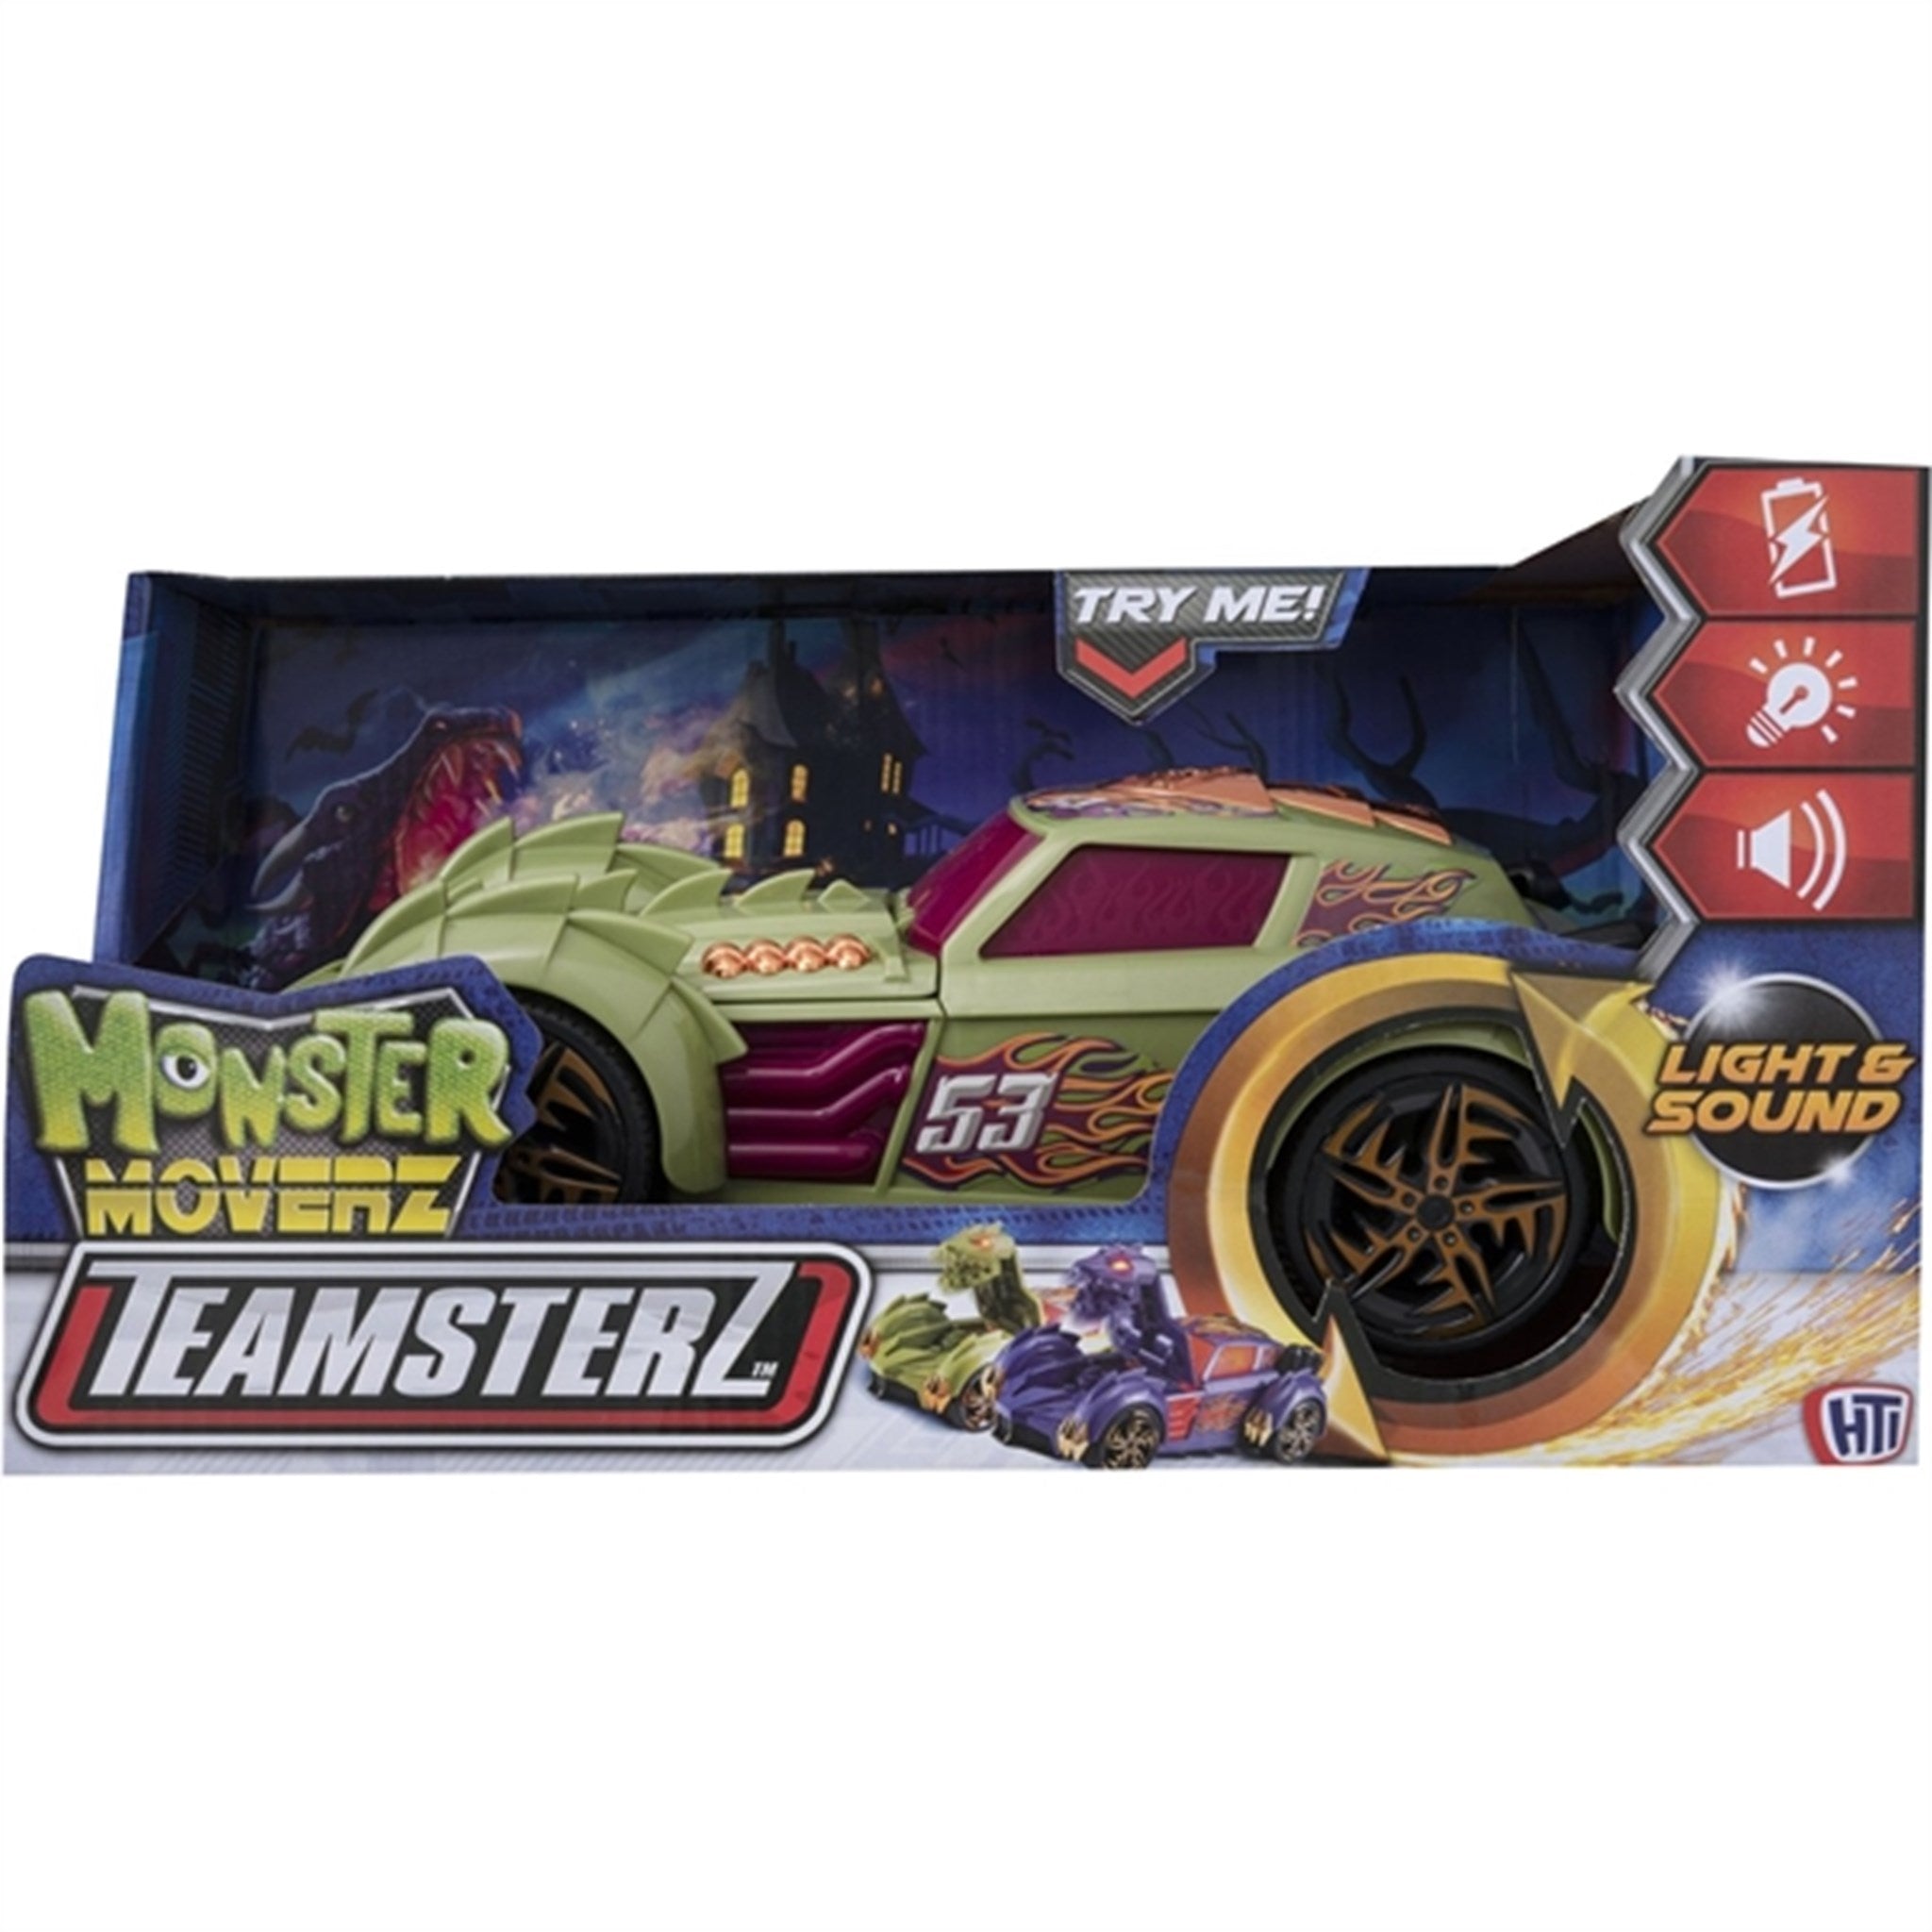 Teamsterz Mighty Moverz NIght Crawler Green 6